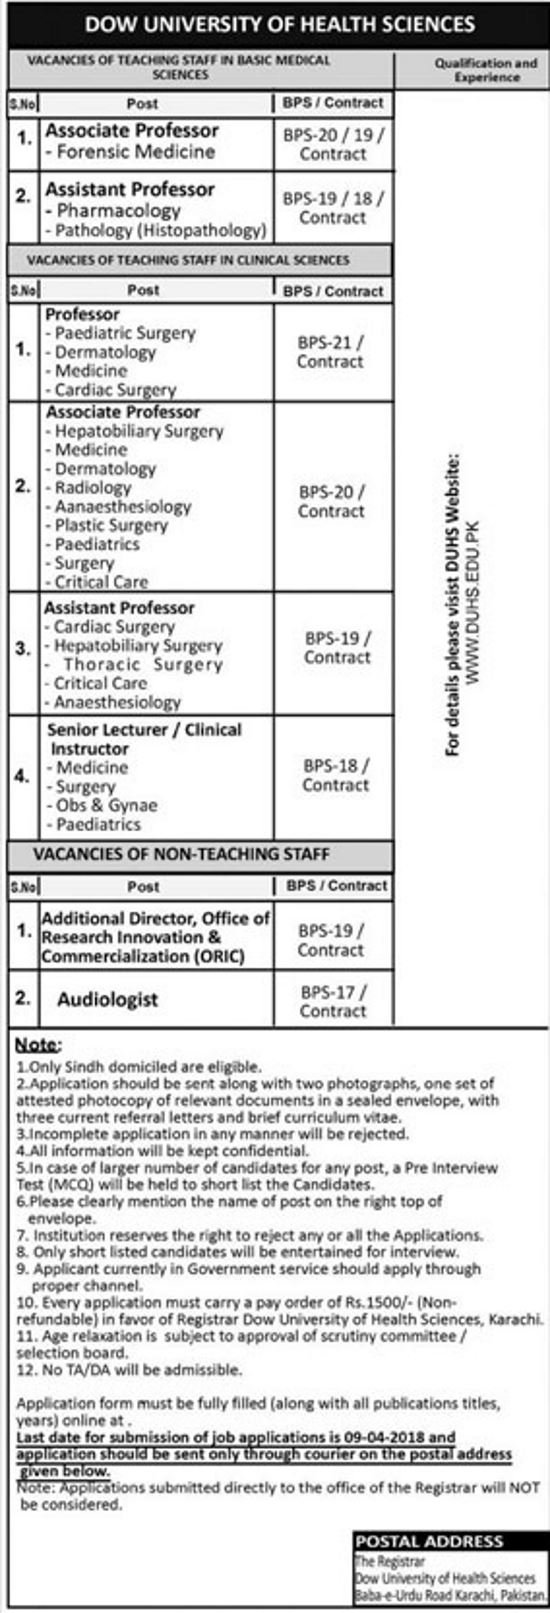  Advertisement of DOW University of Health Sciences (DUHS) Jobs 2018 for Teaching & Non-Teaching Staff Latest